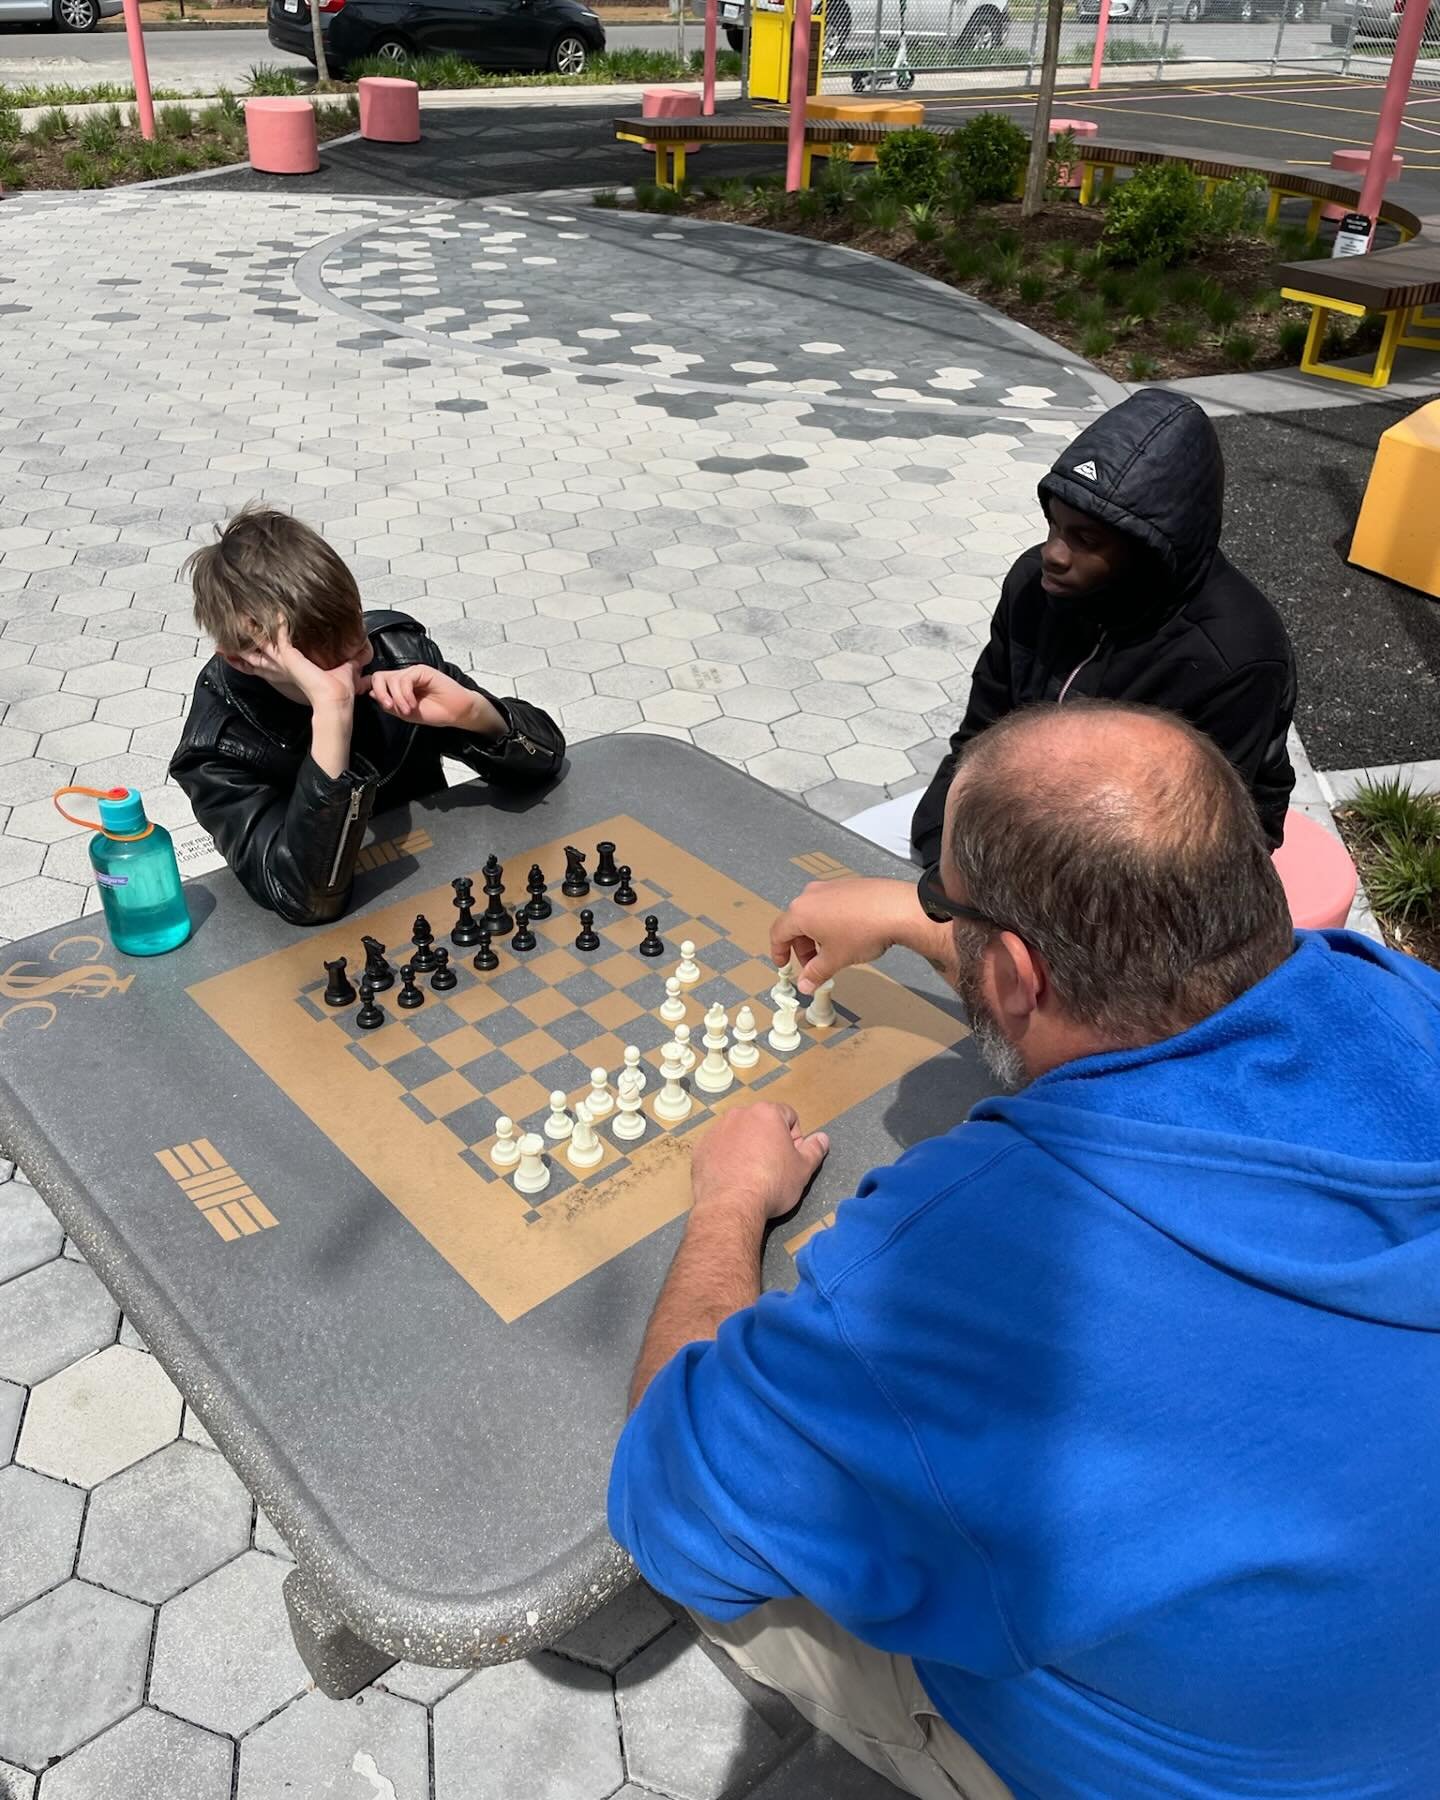 Sudbury students and friends from Maplewood Richmond Heights School District had fun playing chess and exploring Love Bank Park on @cherokeestreet! ♟️🏀🌳 @stlchessclub @blackmenbuildstl #selfdirectededucation